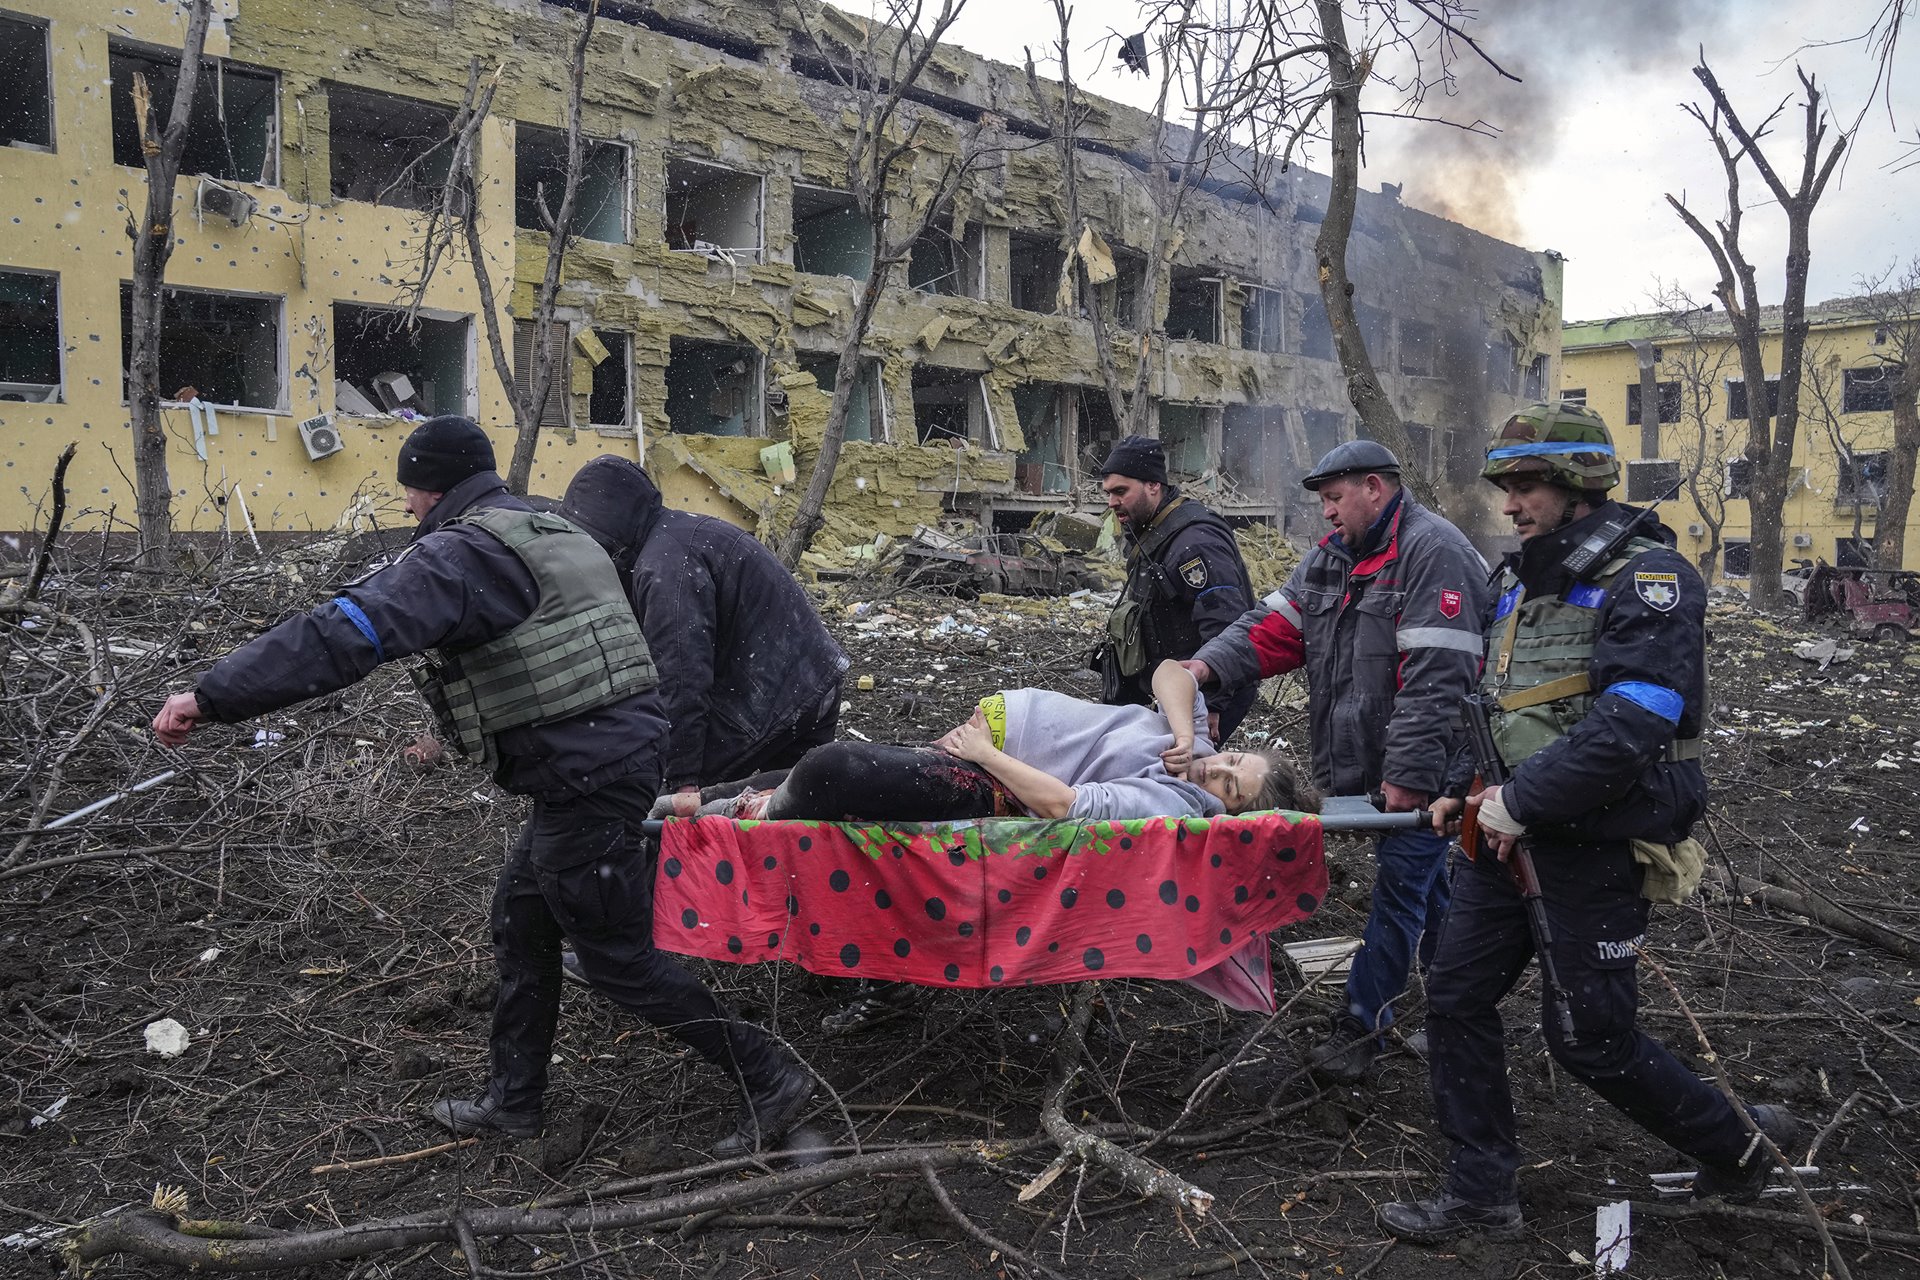 Iryna Kalinina (32), an injured pregnant woman, is carried from a maternity hospital that was damaged during a Russian airstrike in Mariupol, Ukraine. Her baby, named Miron (after the word for &lsquo;peace&rsquo;) was stillborn, and half an hour later Iryna died as well.